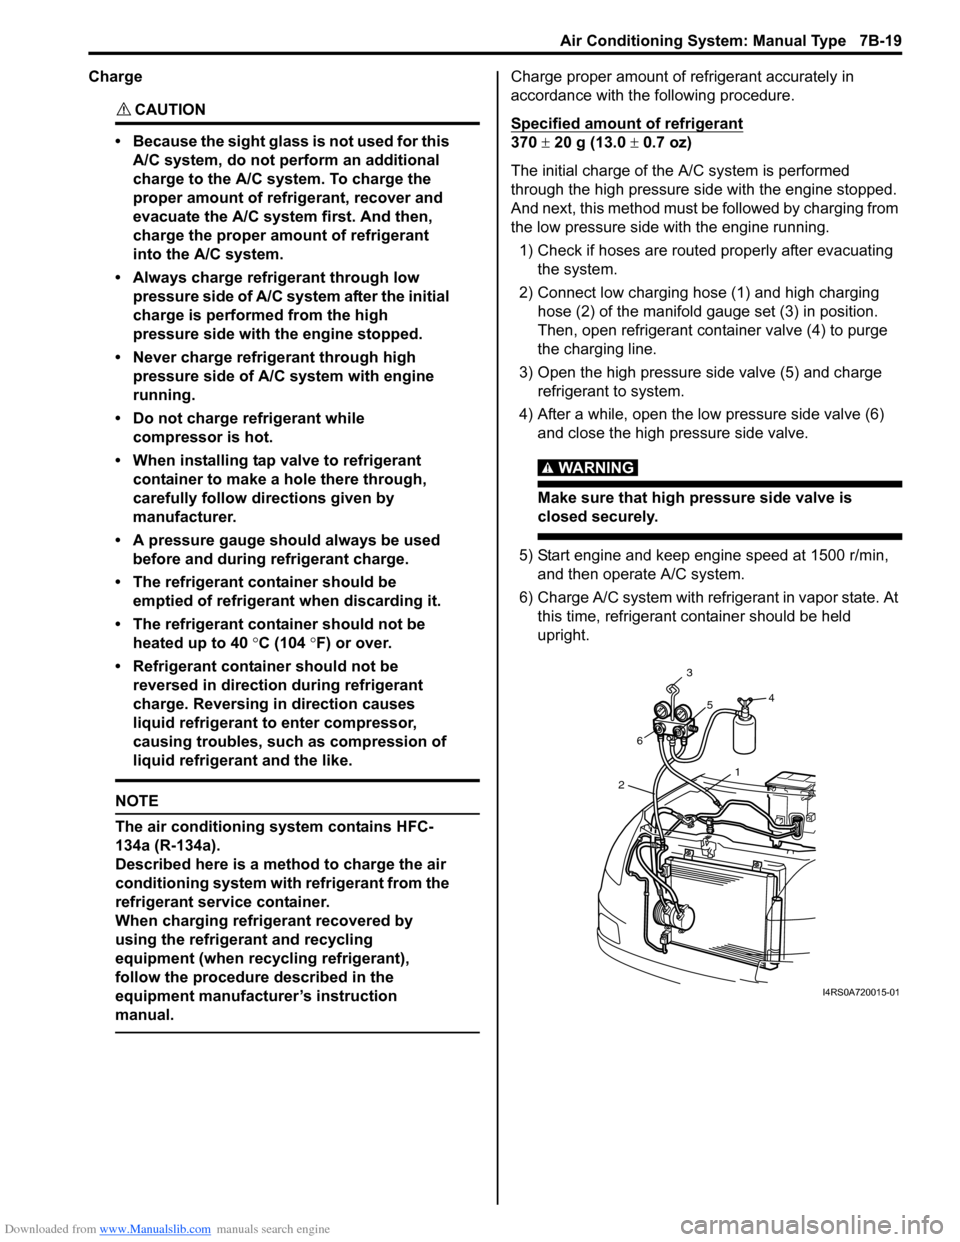 SUZUKI SWIFT 2007 2.G Service Workshop Manual Downloaded from www.Manualslib.com manuals search engine Air Conditioning System: Manual Type 7B-19
Charge
CAUTION! 
• Because the sight glass is not used for this A/C system, do not perform an addi